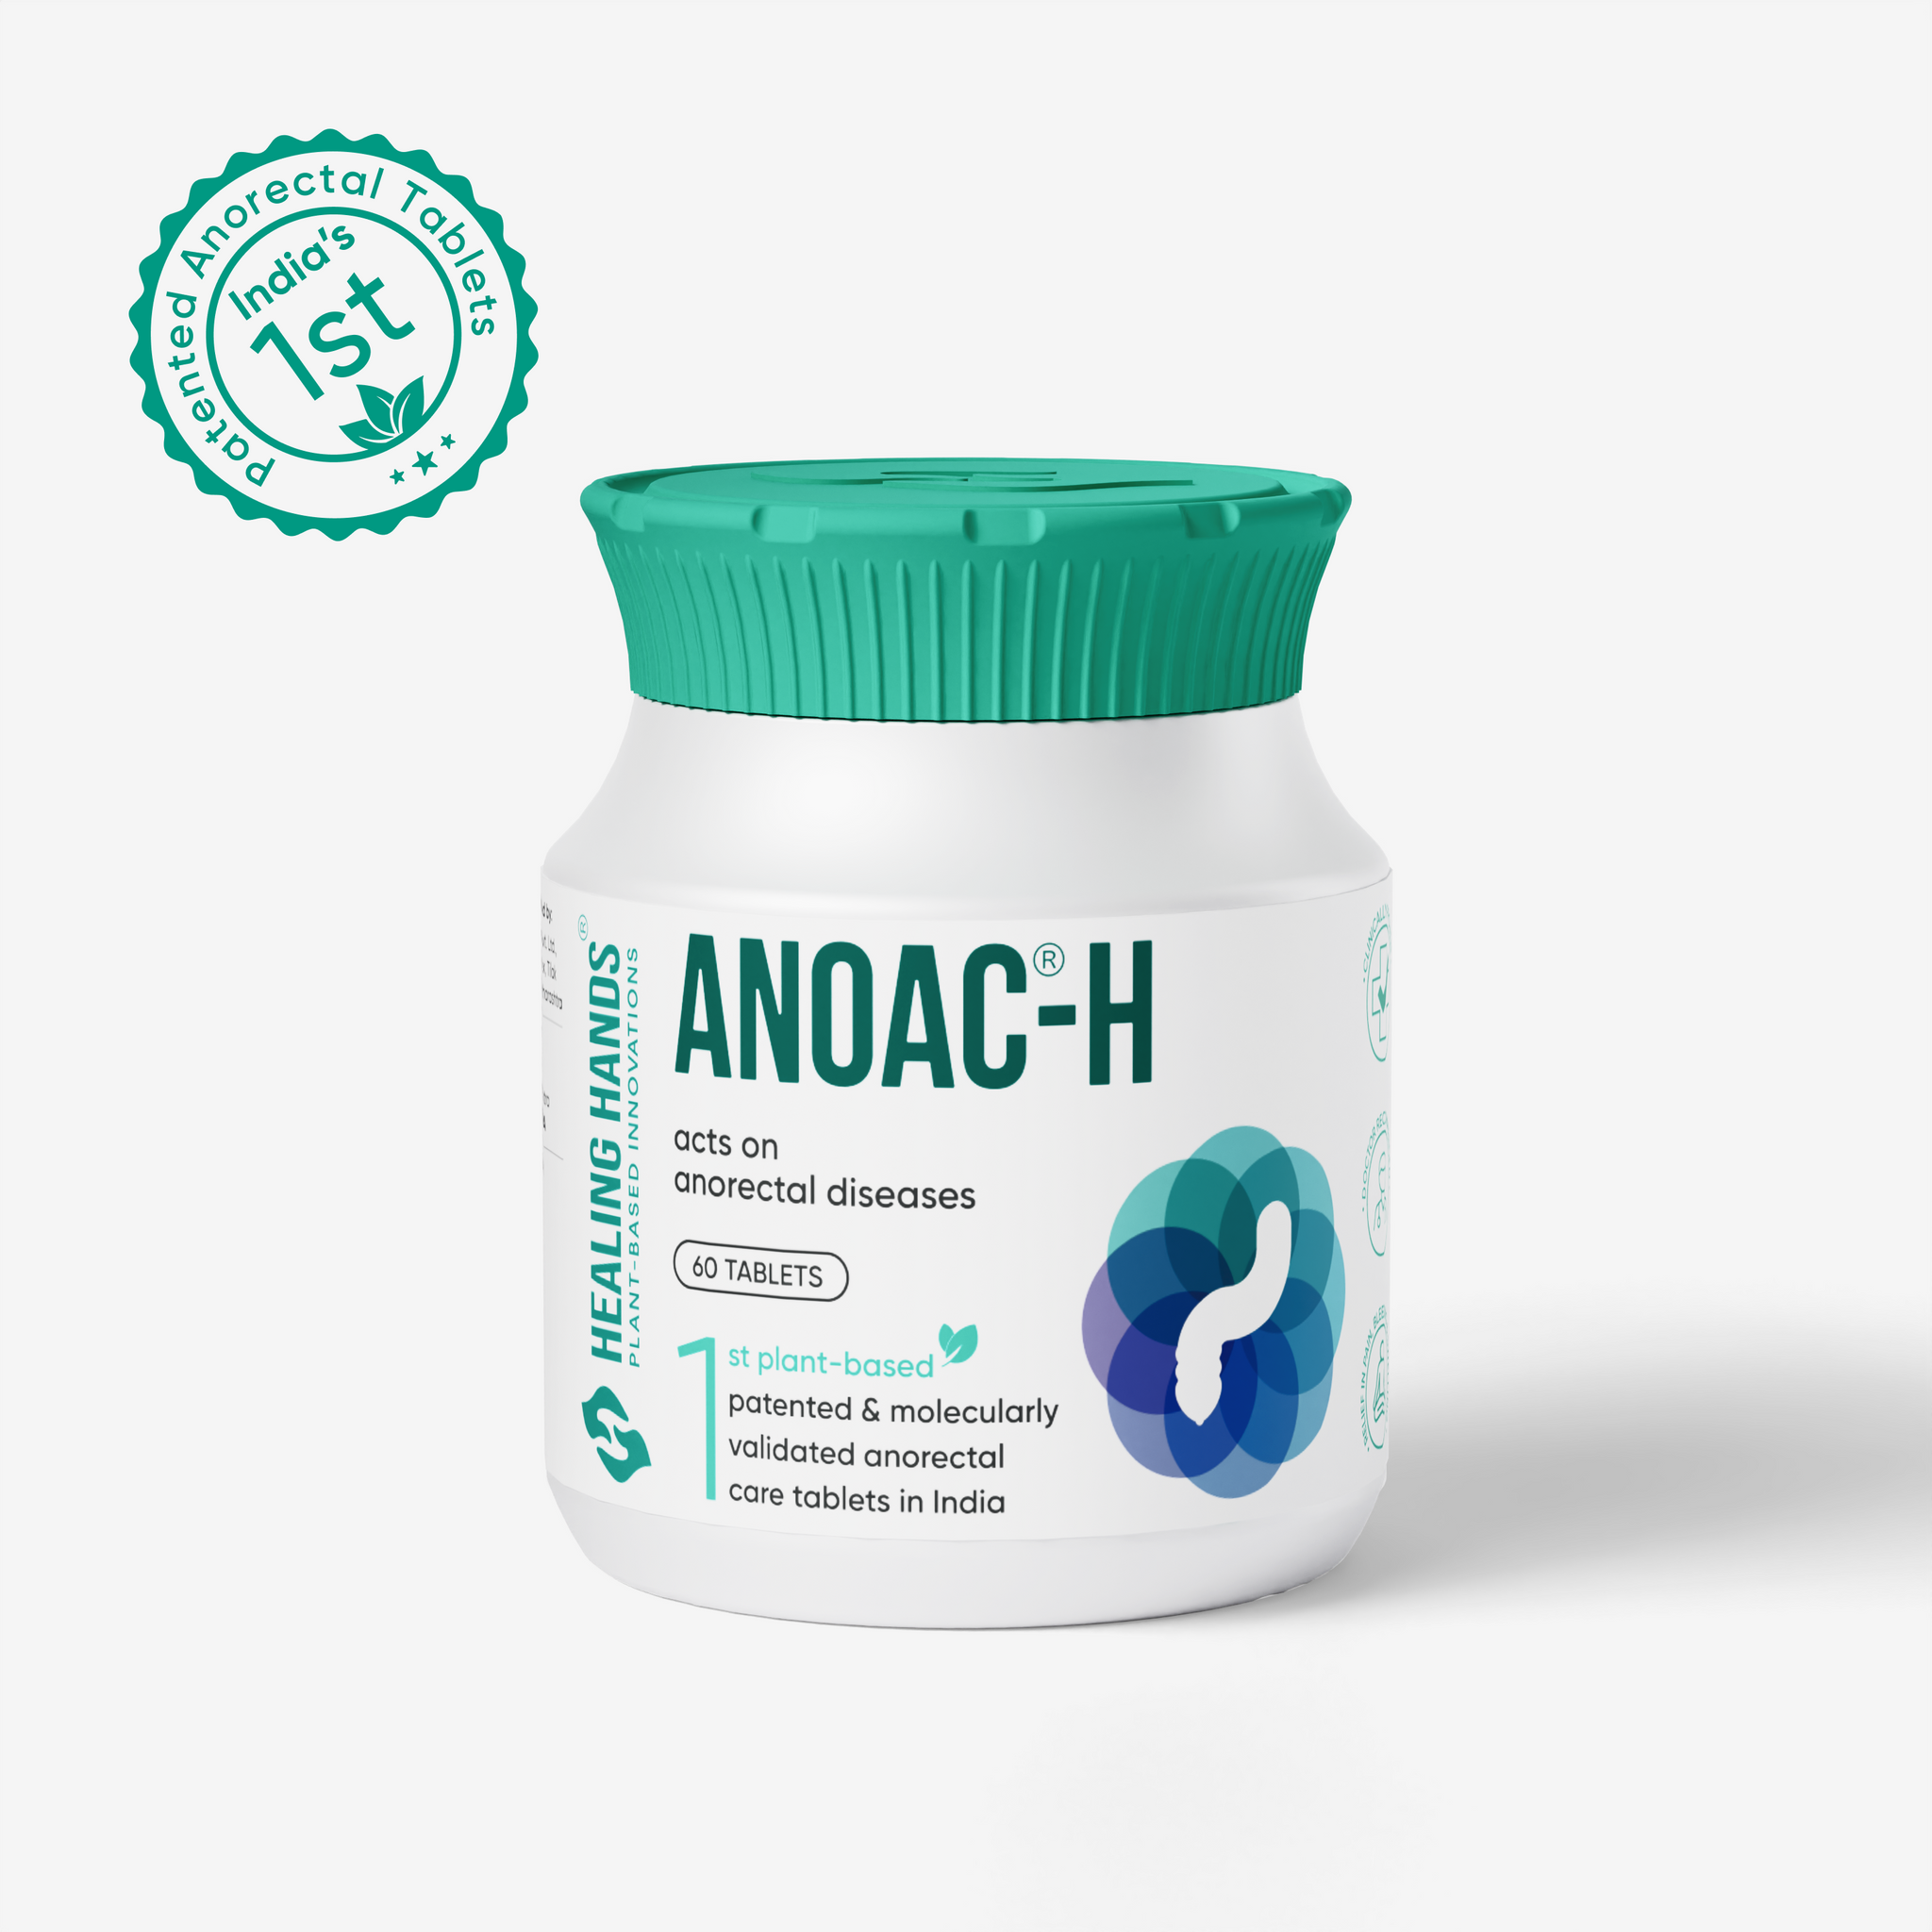 Anoac-H Advanced Tablets for Severe Piles and Fissures I 60 Tablets – 2X PiloTab Strength